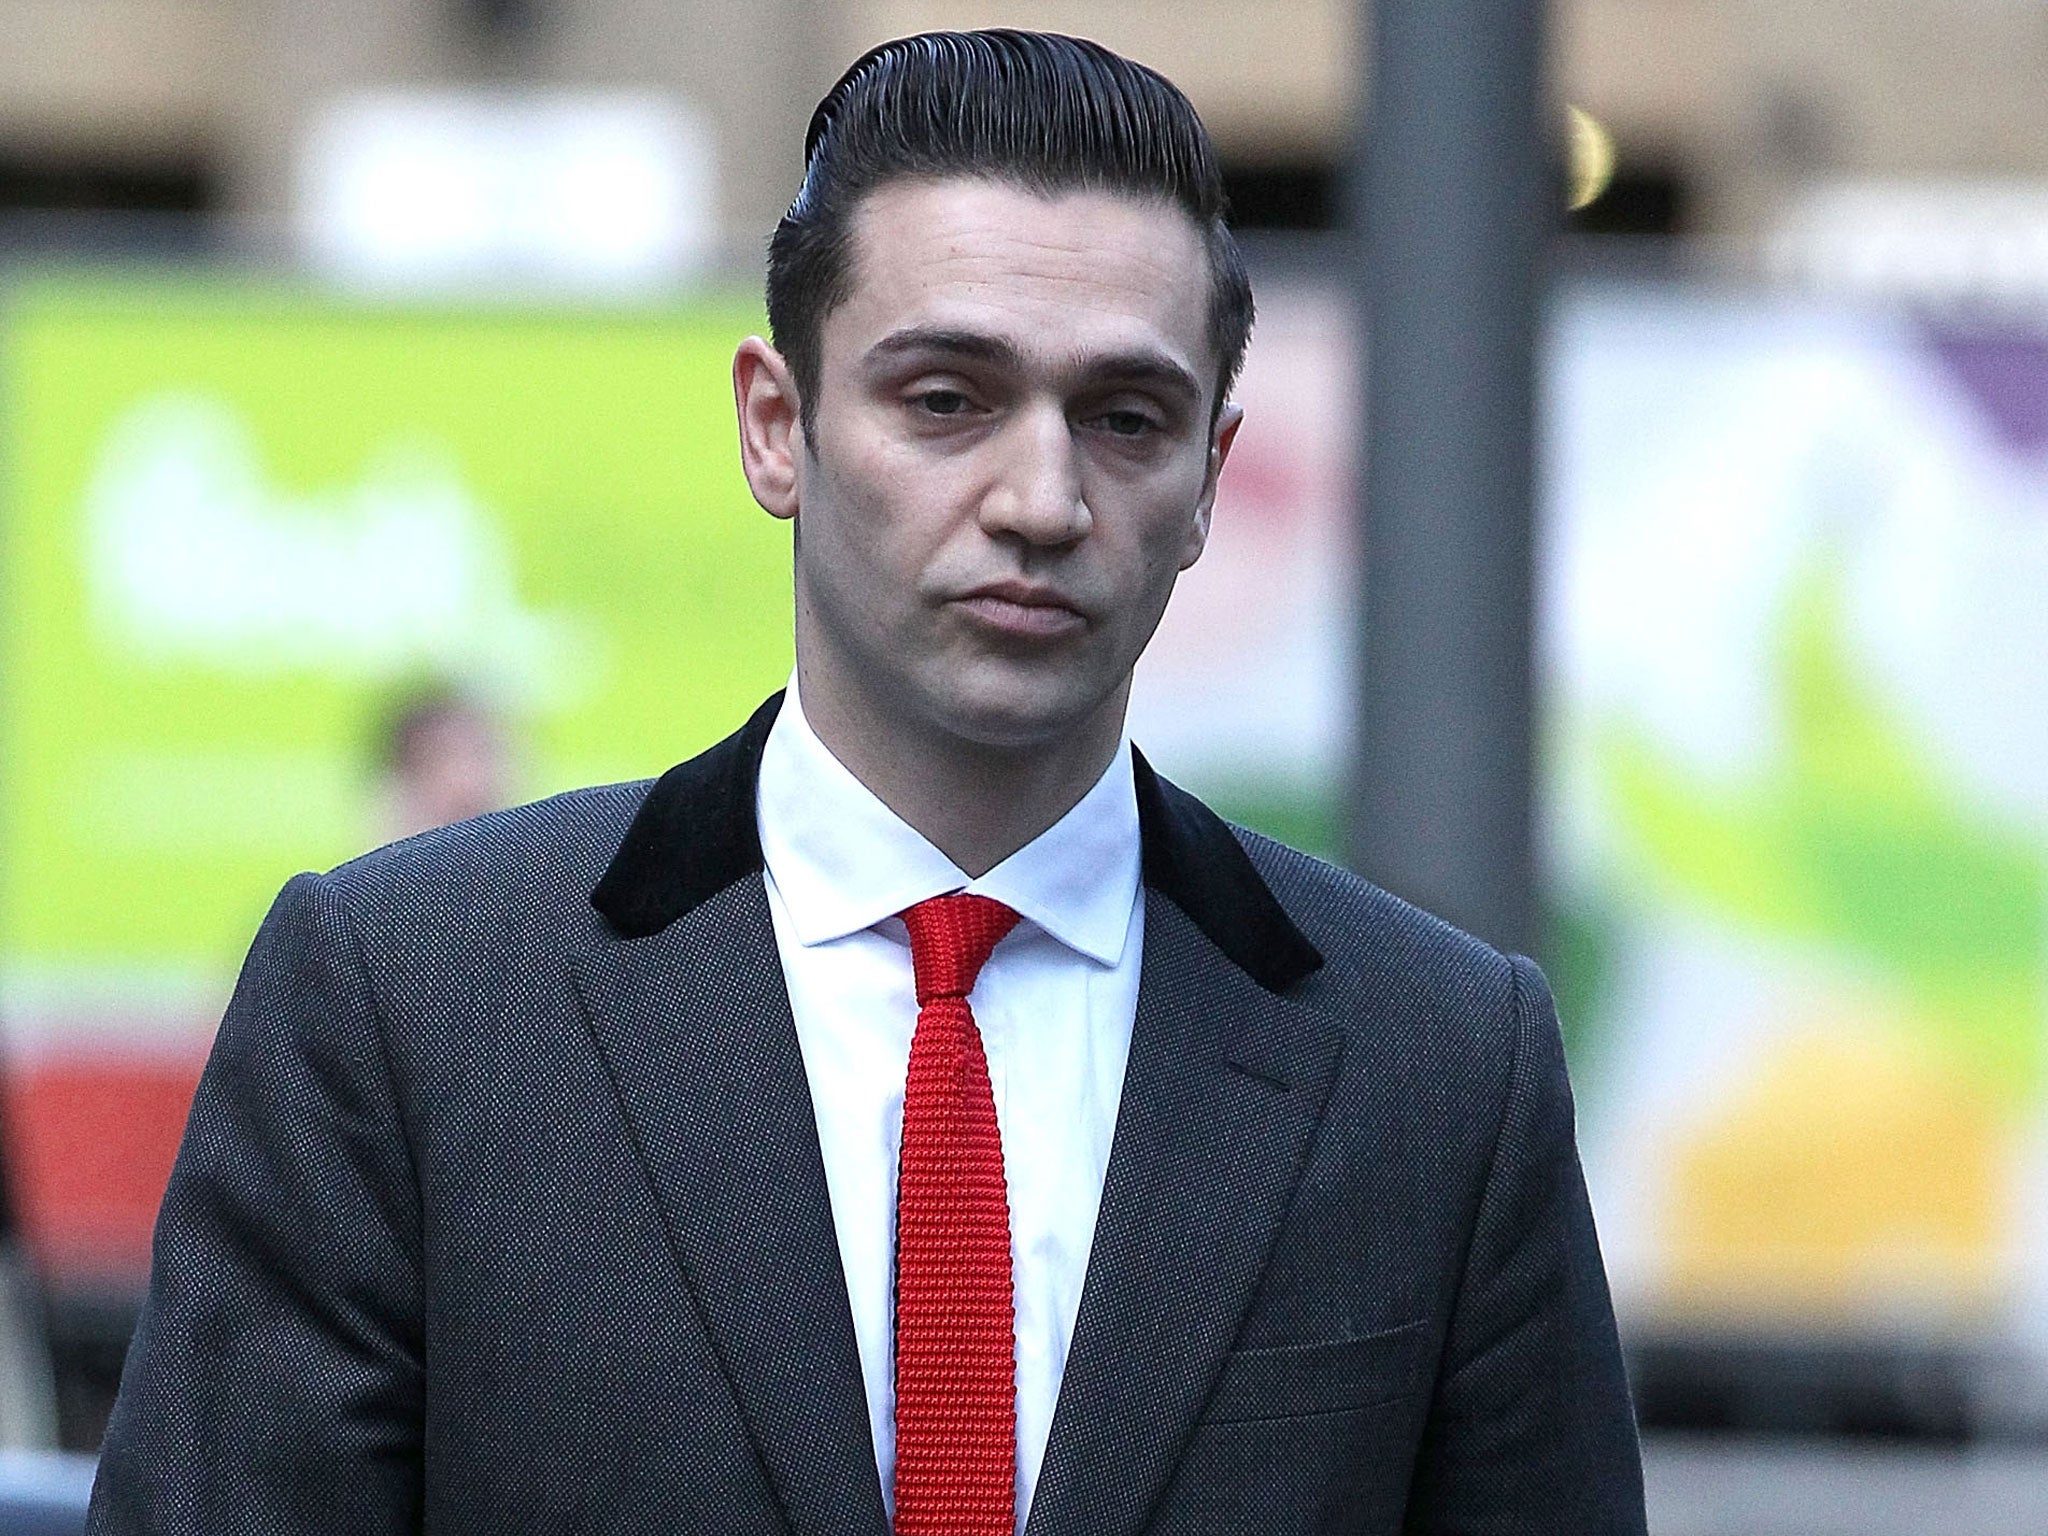 Reg Traviss faces two charges of rape